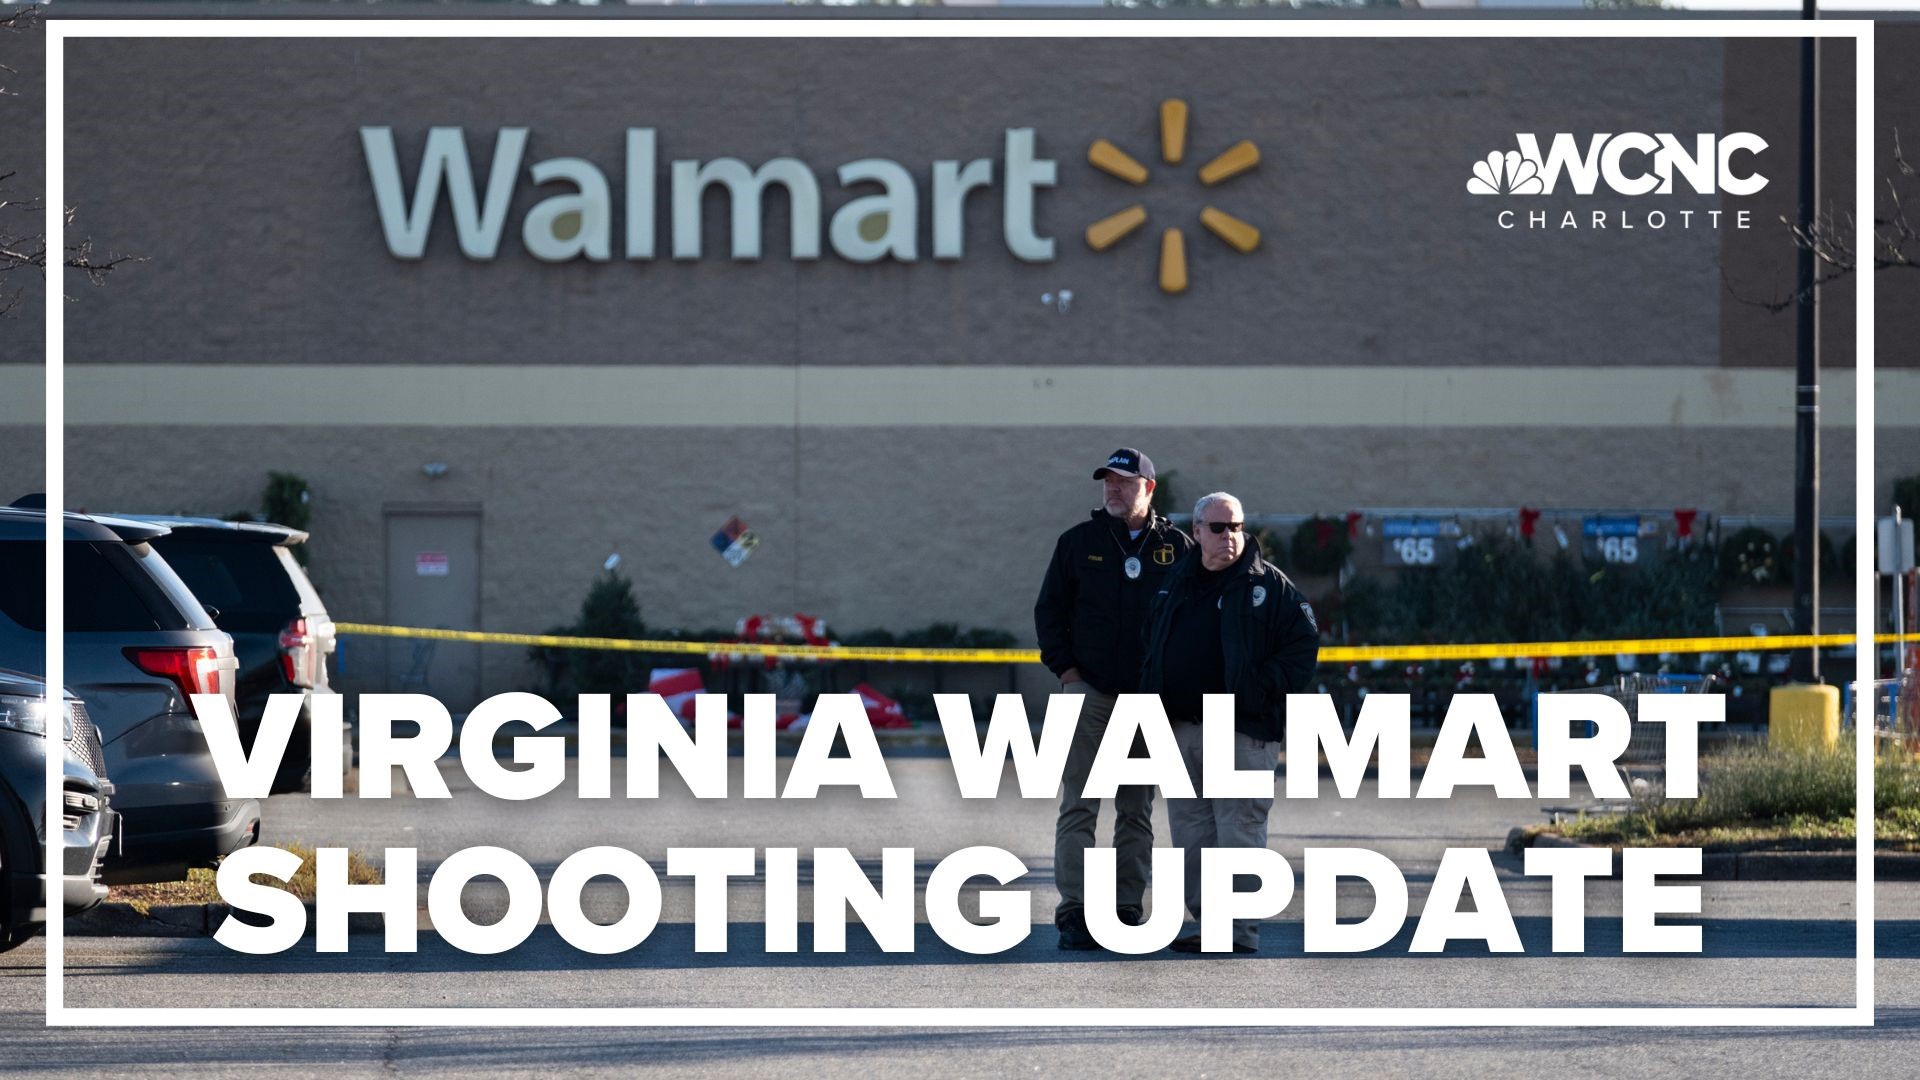 Police in Chesapeake, Virginia, confirmed six people and the gunman were killed in a mass shooting at a Walmart late Tuesday.